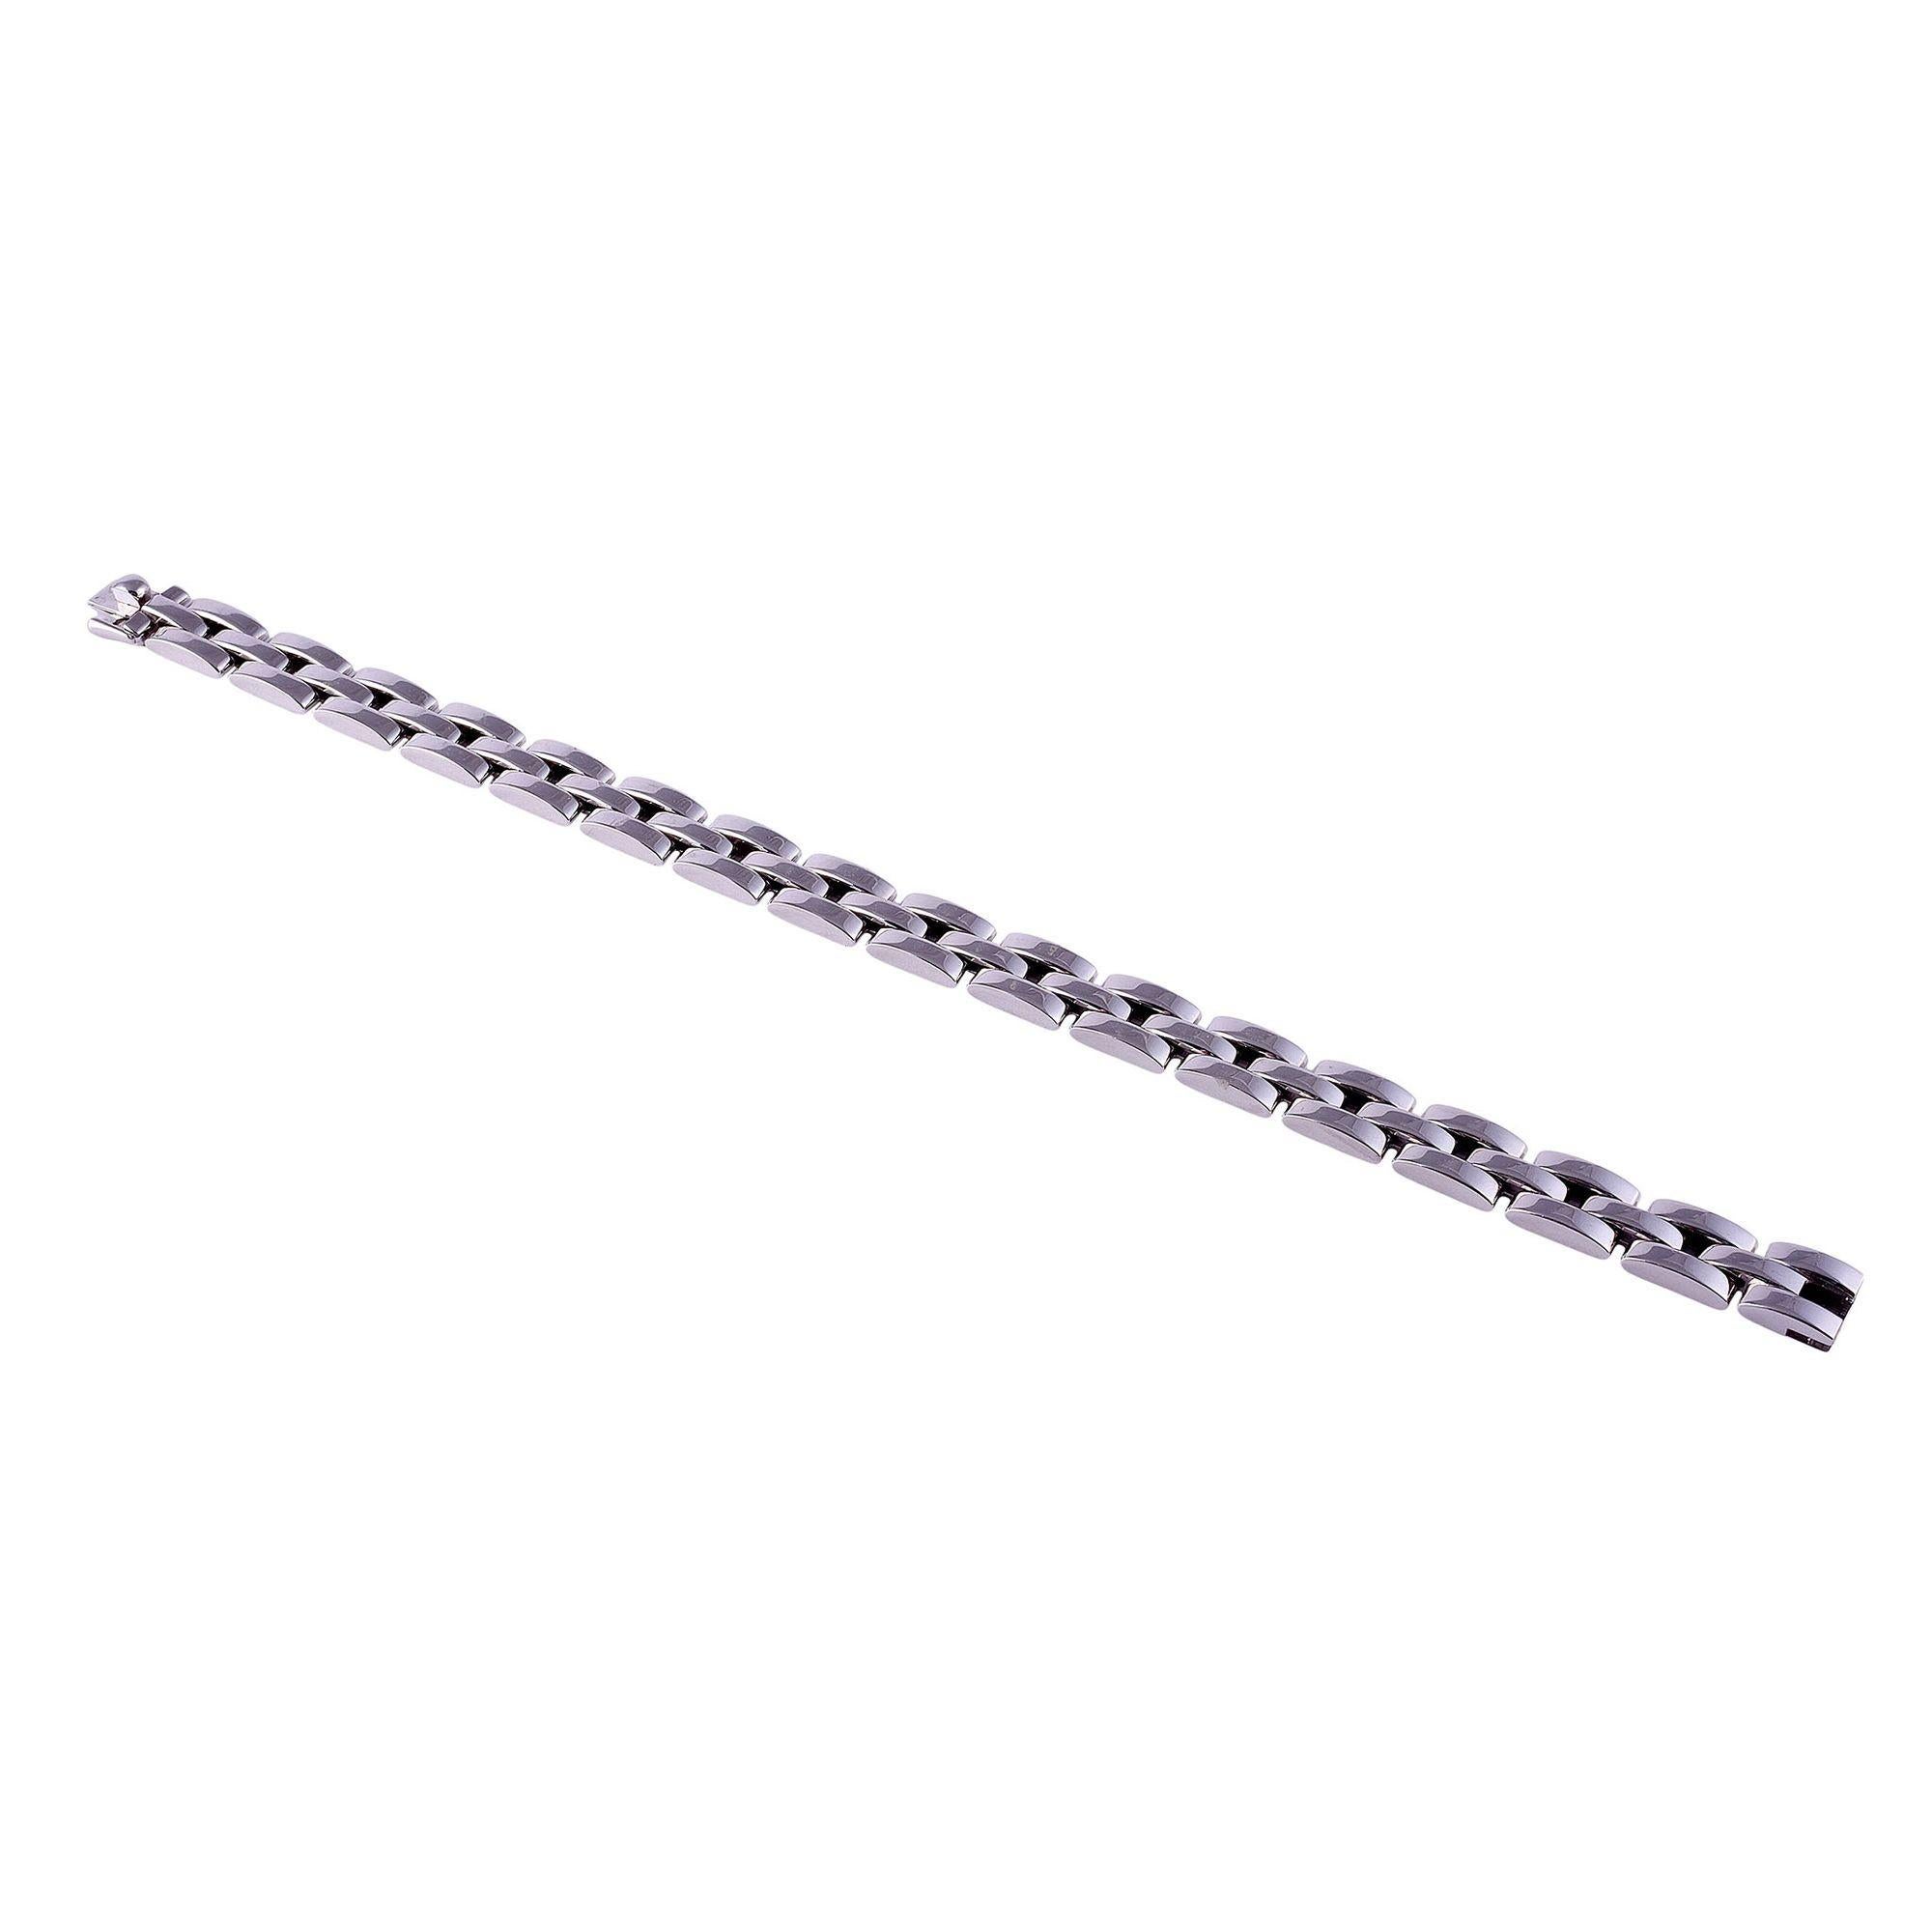 Estate French Cartier Maillon Panthere 18K white gold bracelet. This French bracelet is crafted in 18 karat white gold by Cartier. The Maillon Panthere bracelet is numbered 980543 and comes in a Cartier box. The Cartier bracelet weighs 42.7 grams.